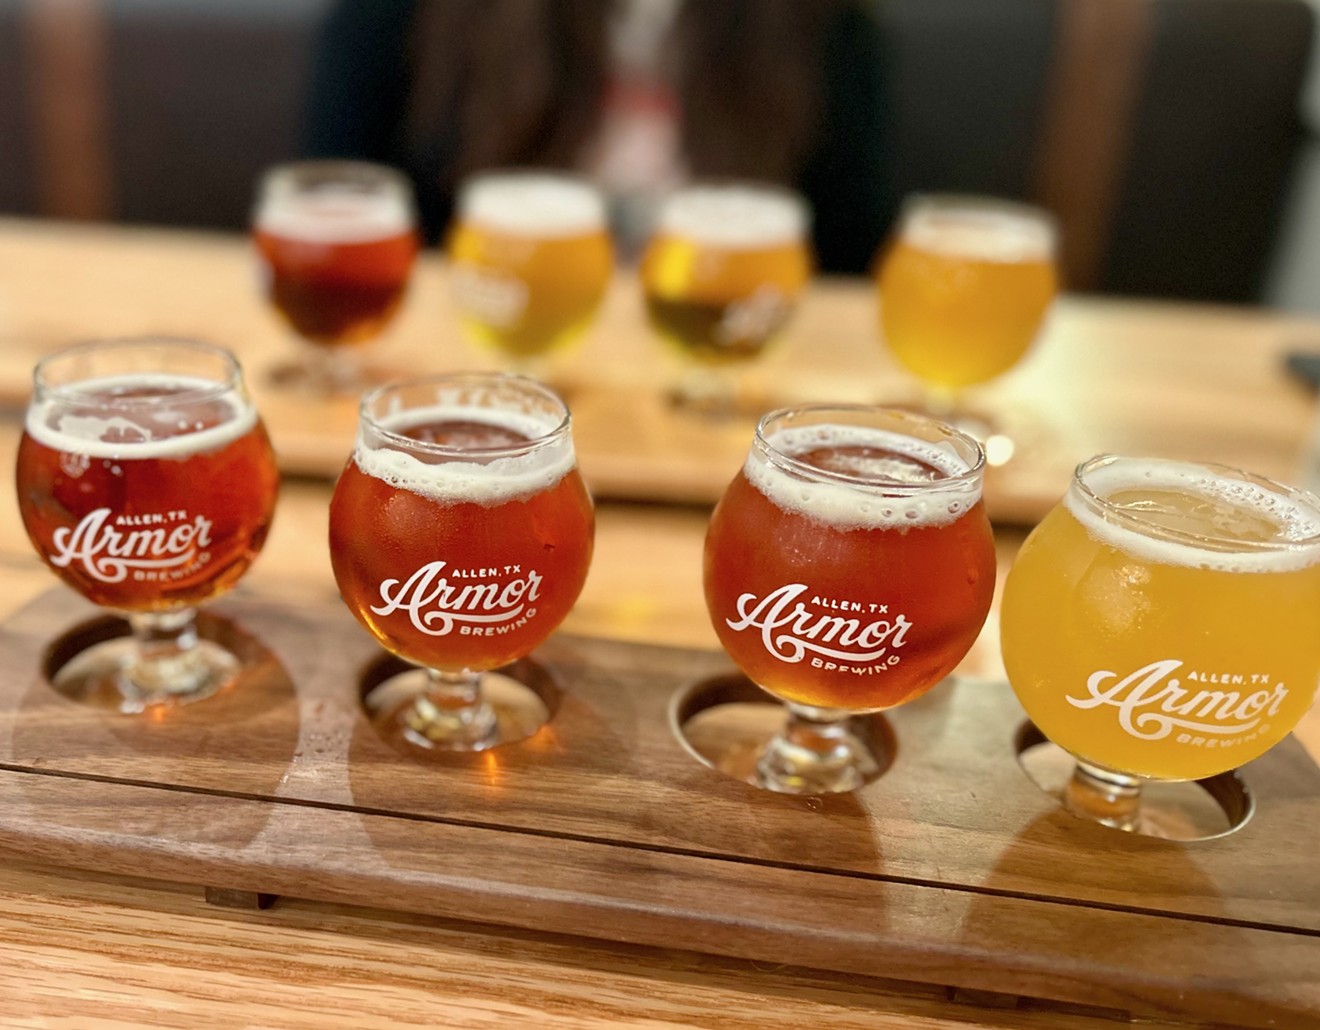 A flight of beers from Armor is just $15.